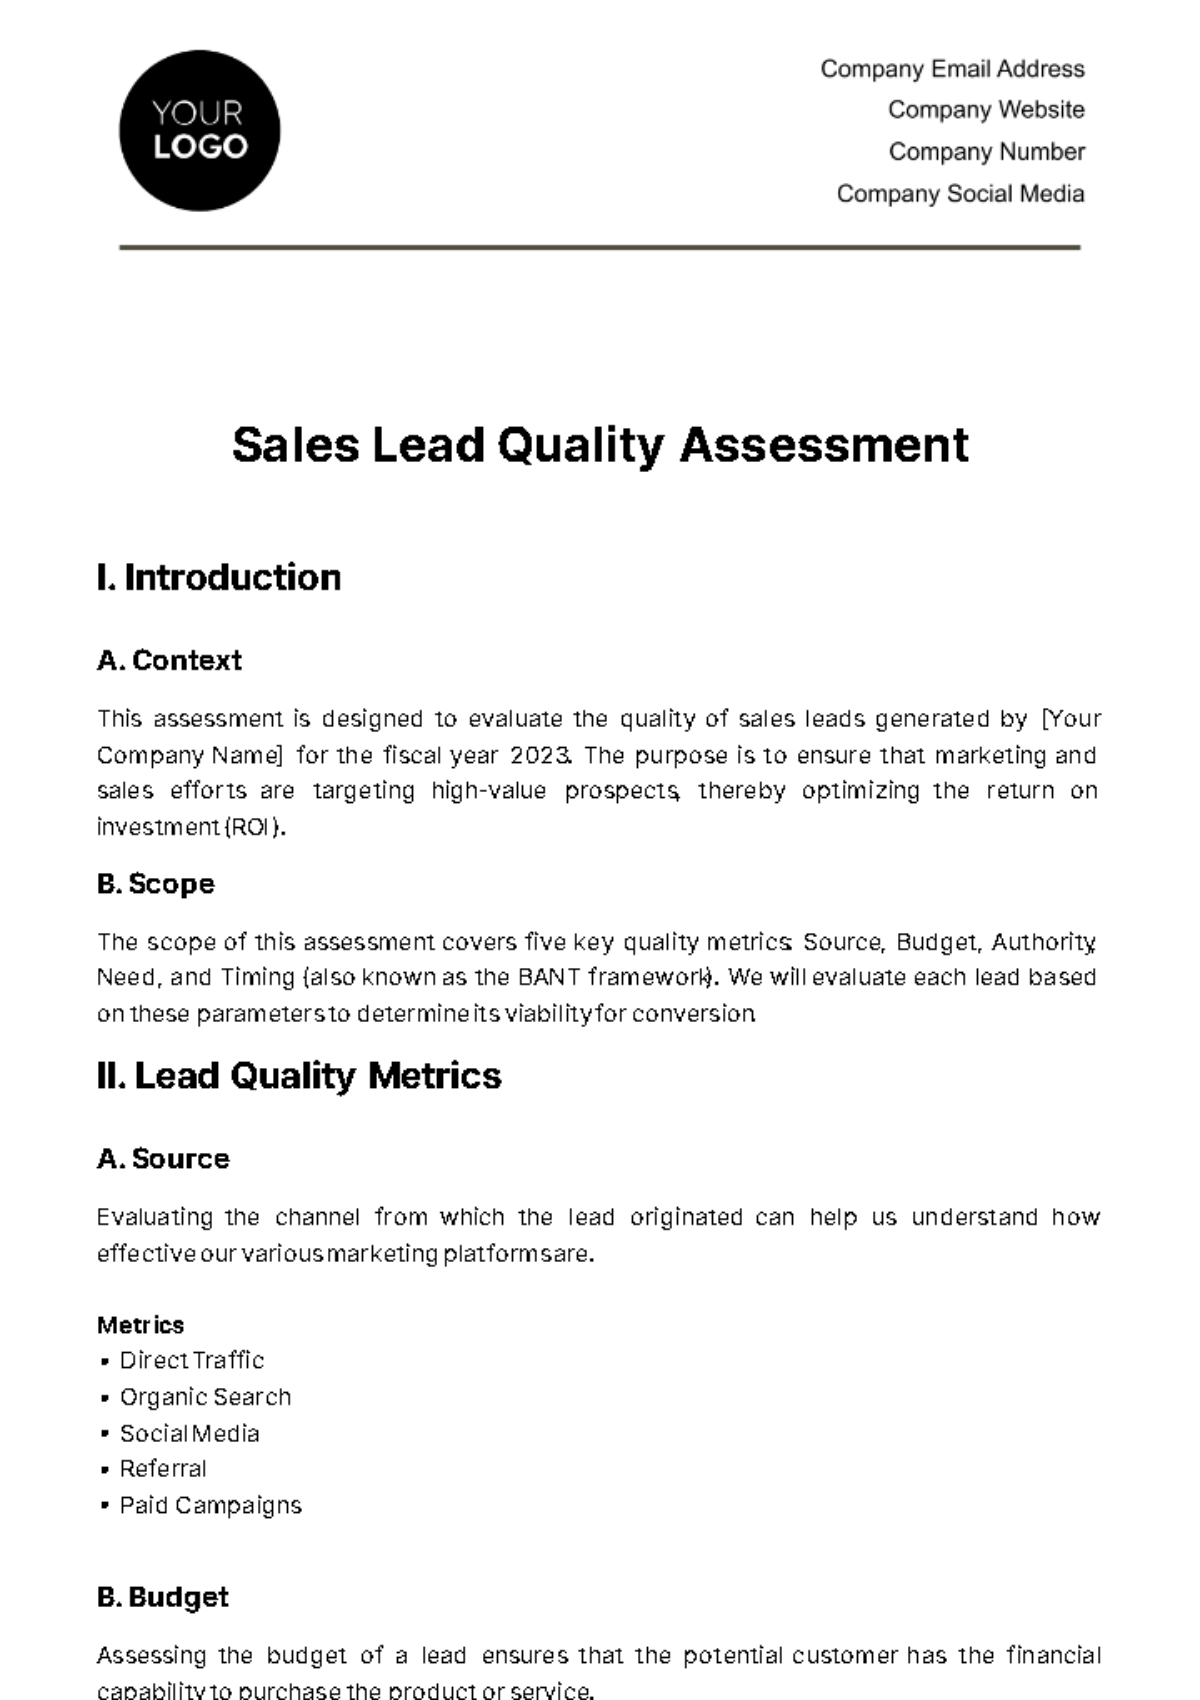 Free Sales Lead Quality Assessment Template